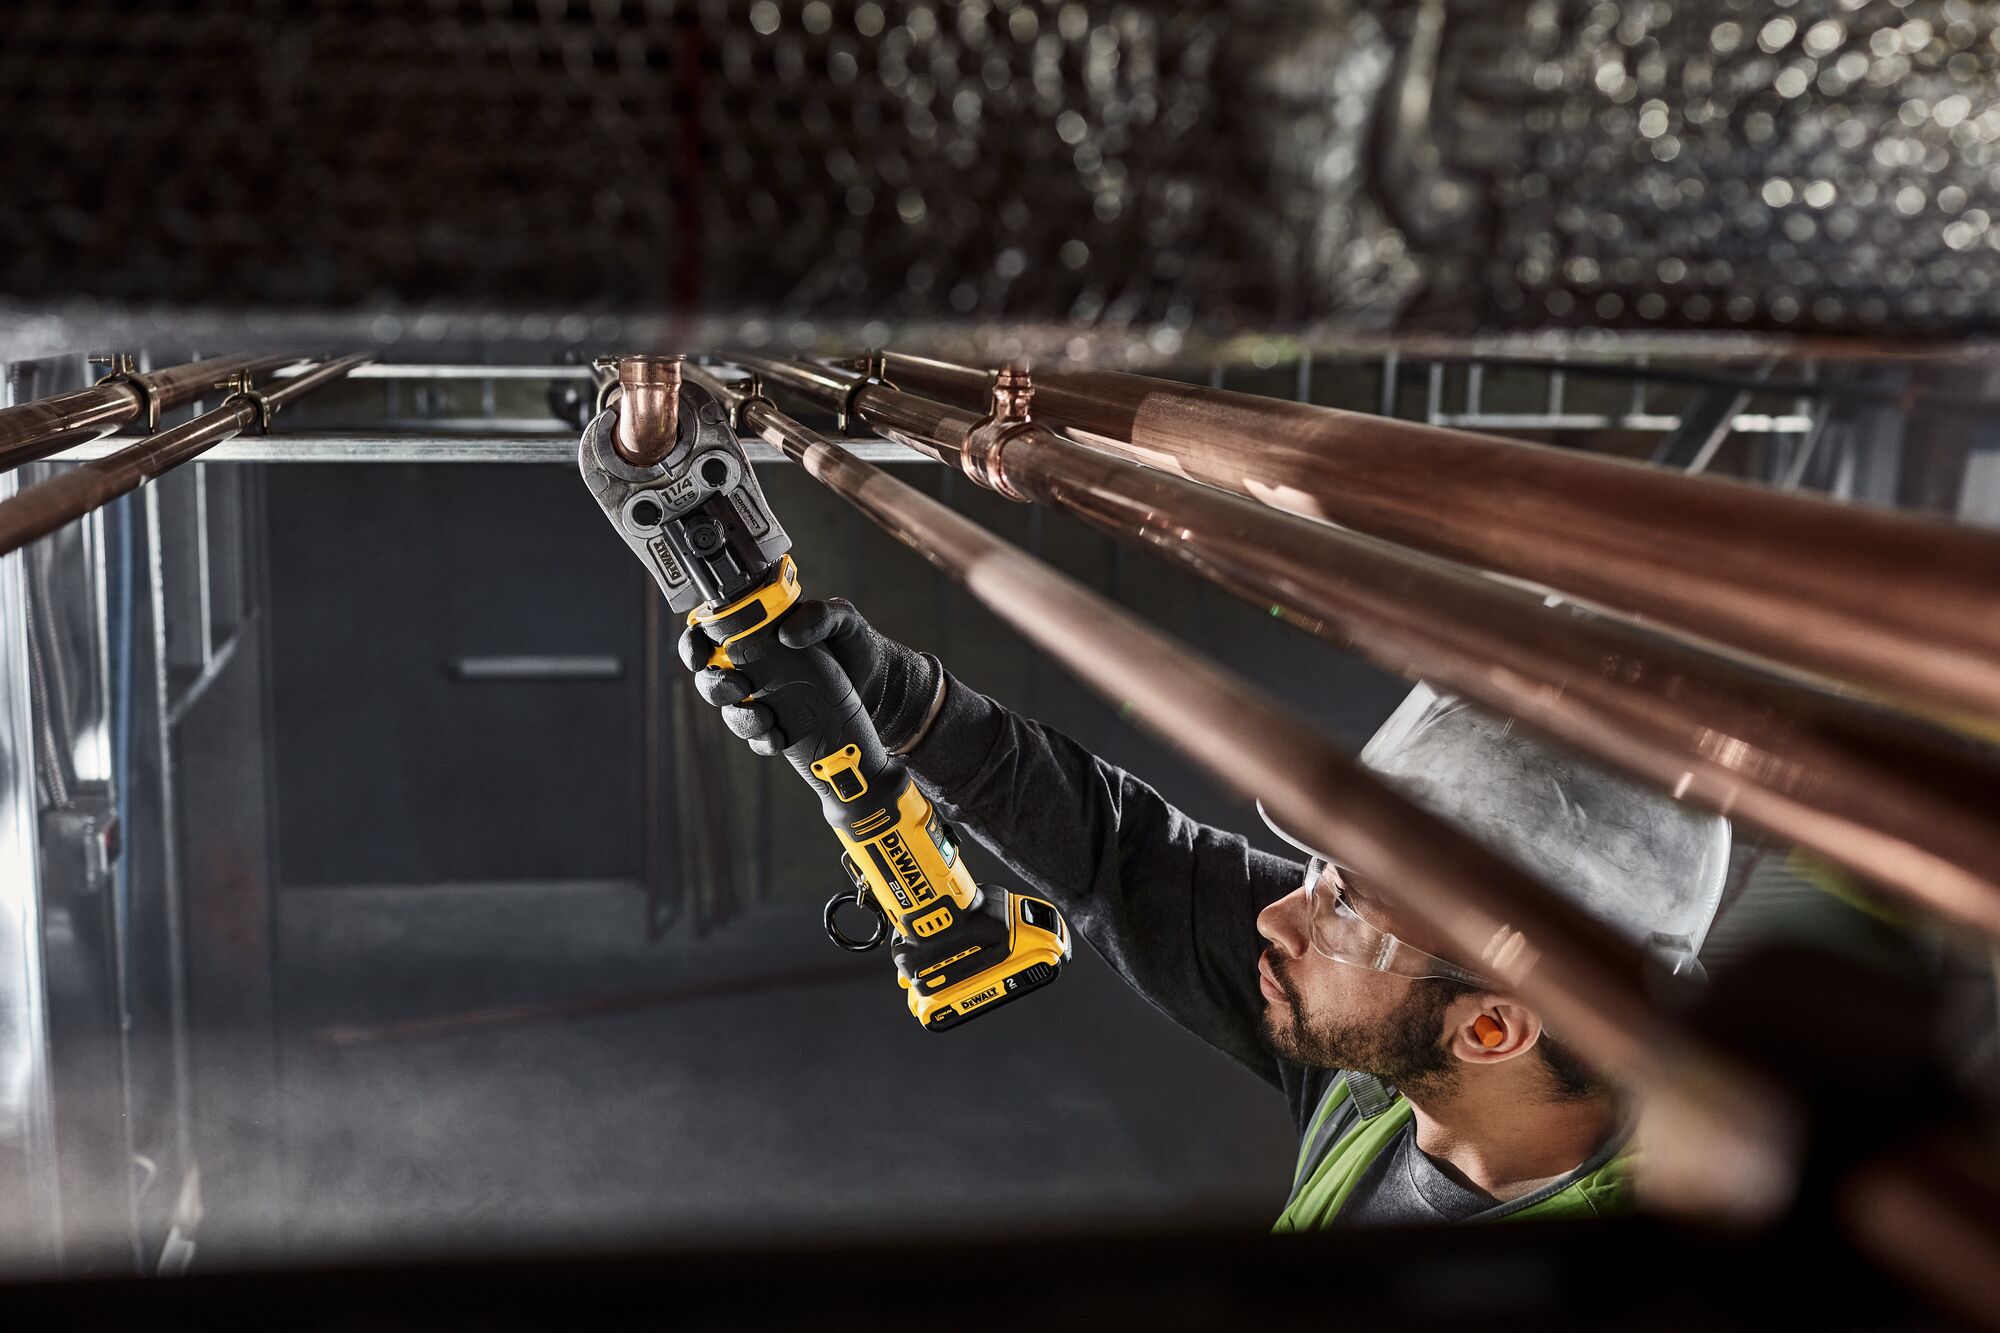 DEWALT Compact Press Tool pressing copper pipe overhead in a mechanical room.